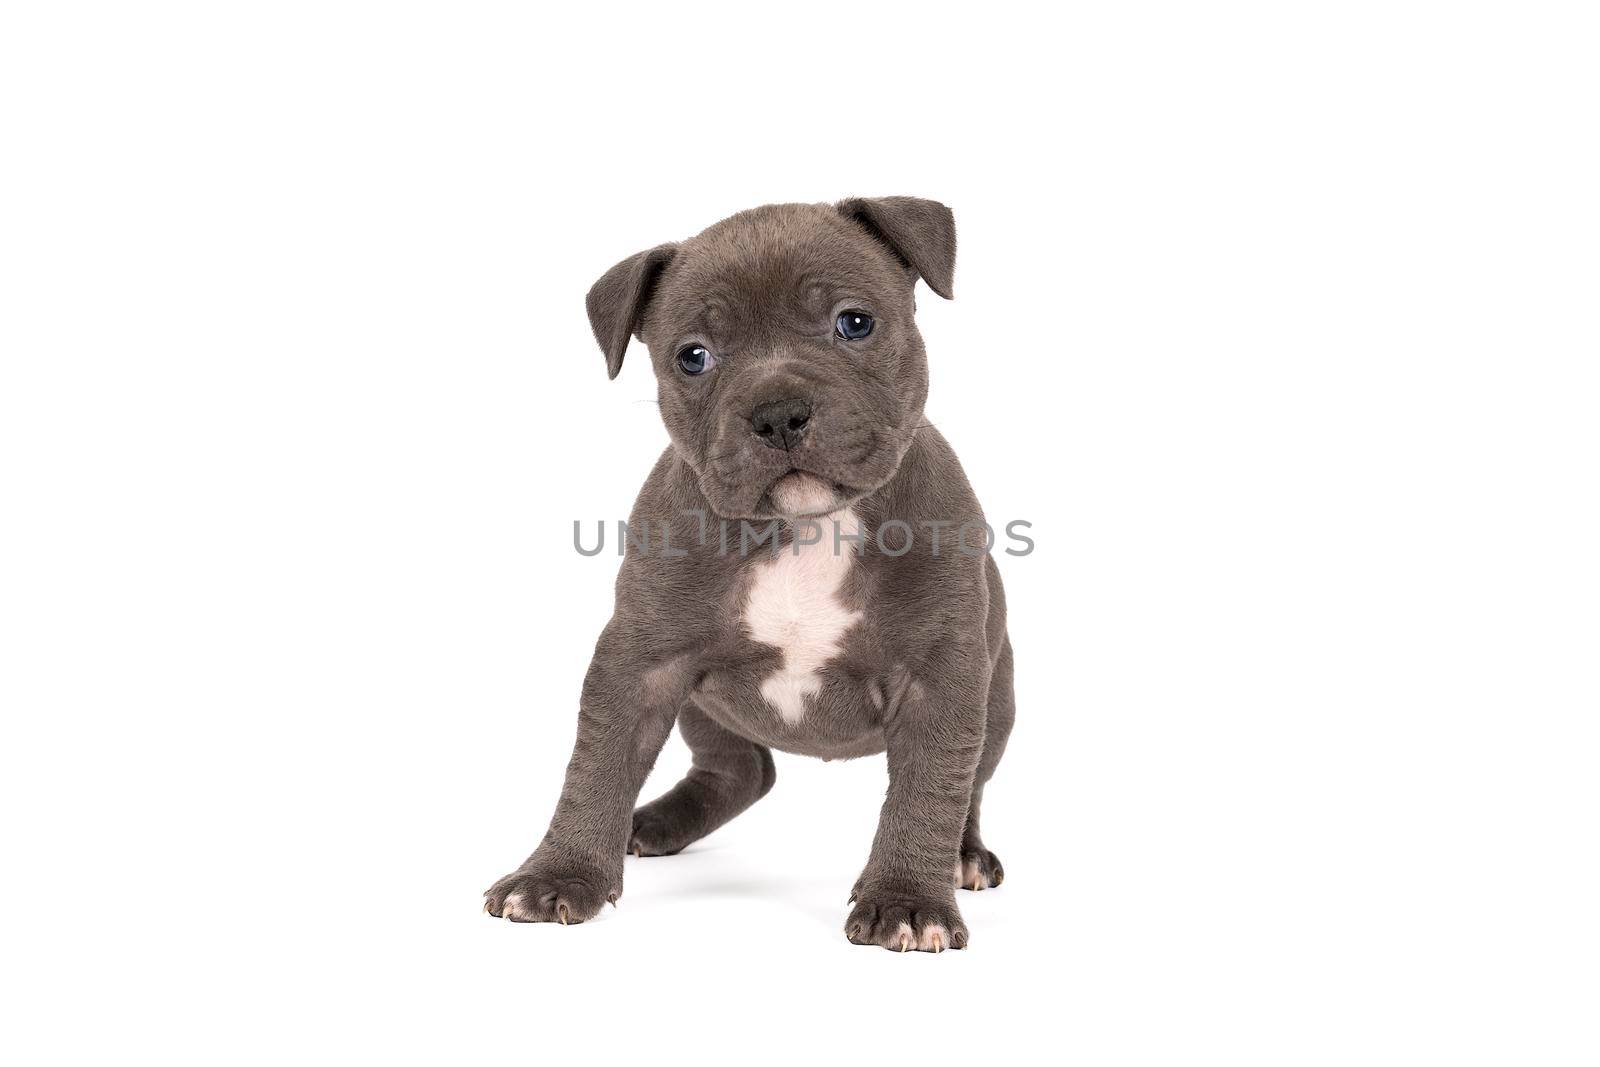 A purebred American Bully or Bulldog pup with blue and white fur standing looking at the camera isolated on a white background